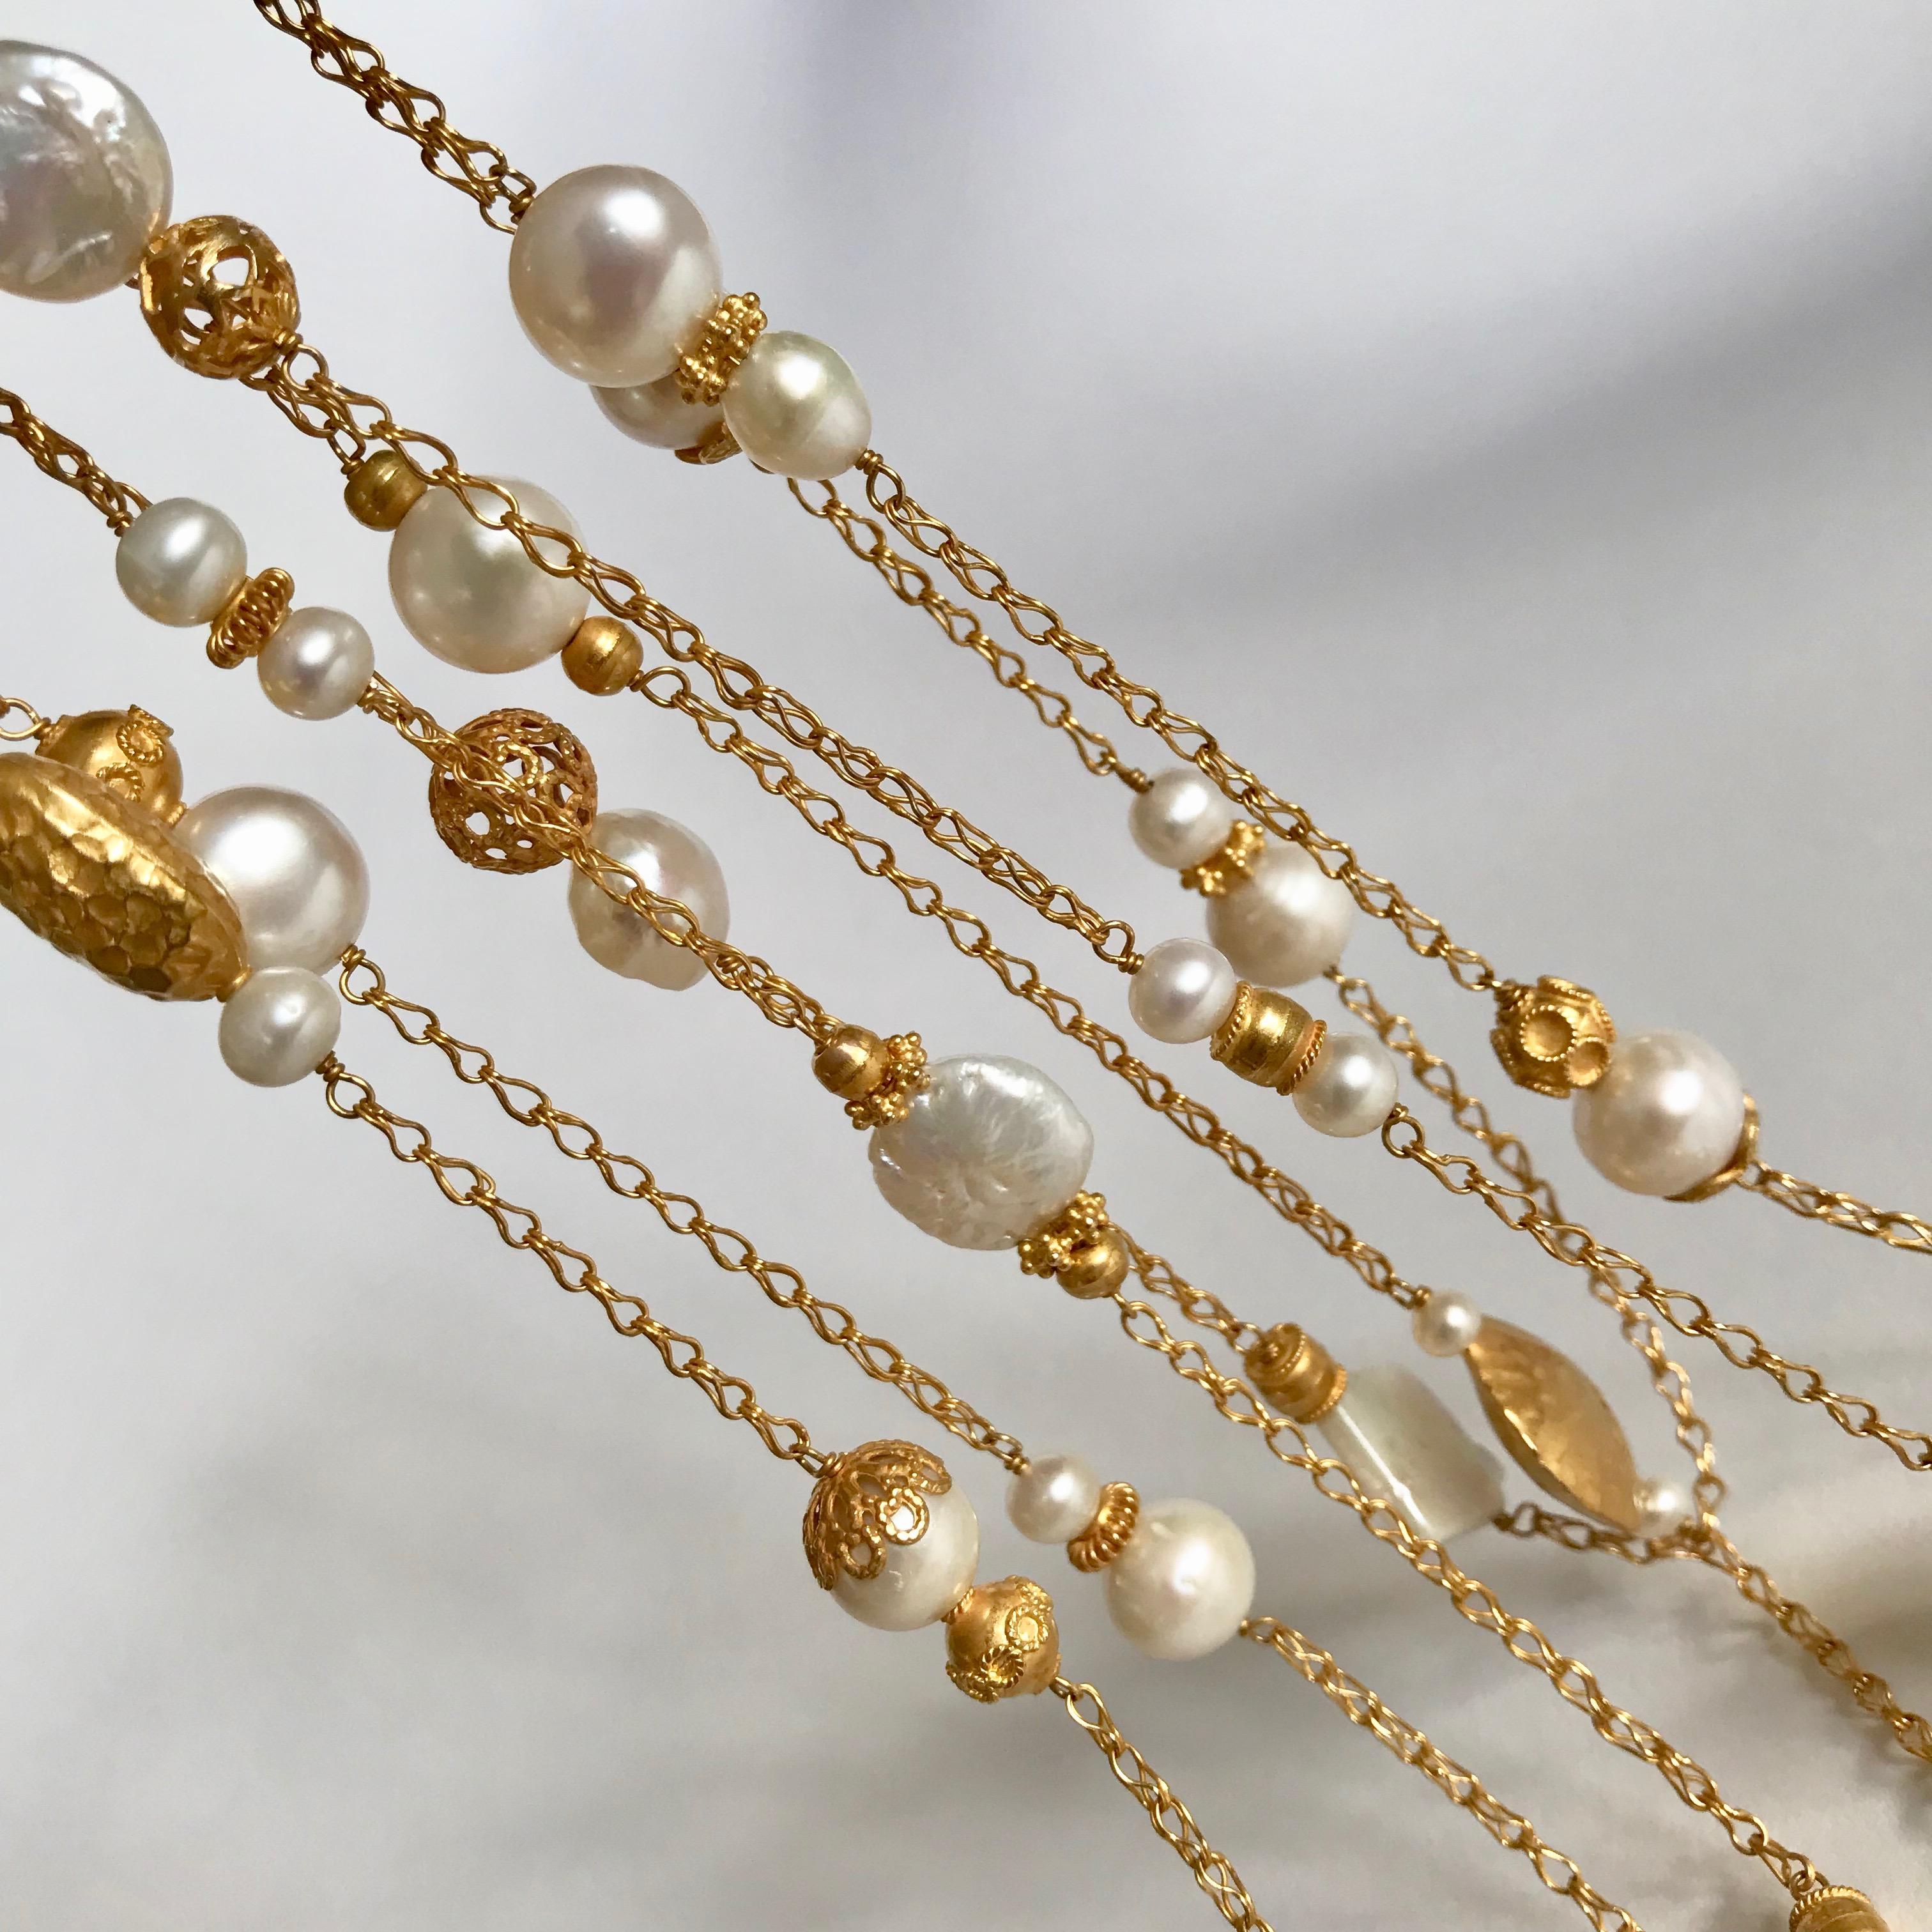 Skilfully handmade solid yellow gold and freshwater baroque cultured pearls in satin finish.
This necklace has a secure hand made clasp and it has been Hallmarked at London Goldsmiths’ Company – Assay Office. 
It is timeless, easy to wear and gives